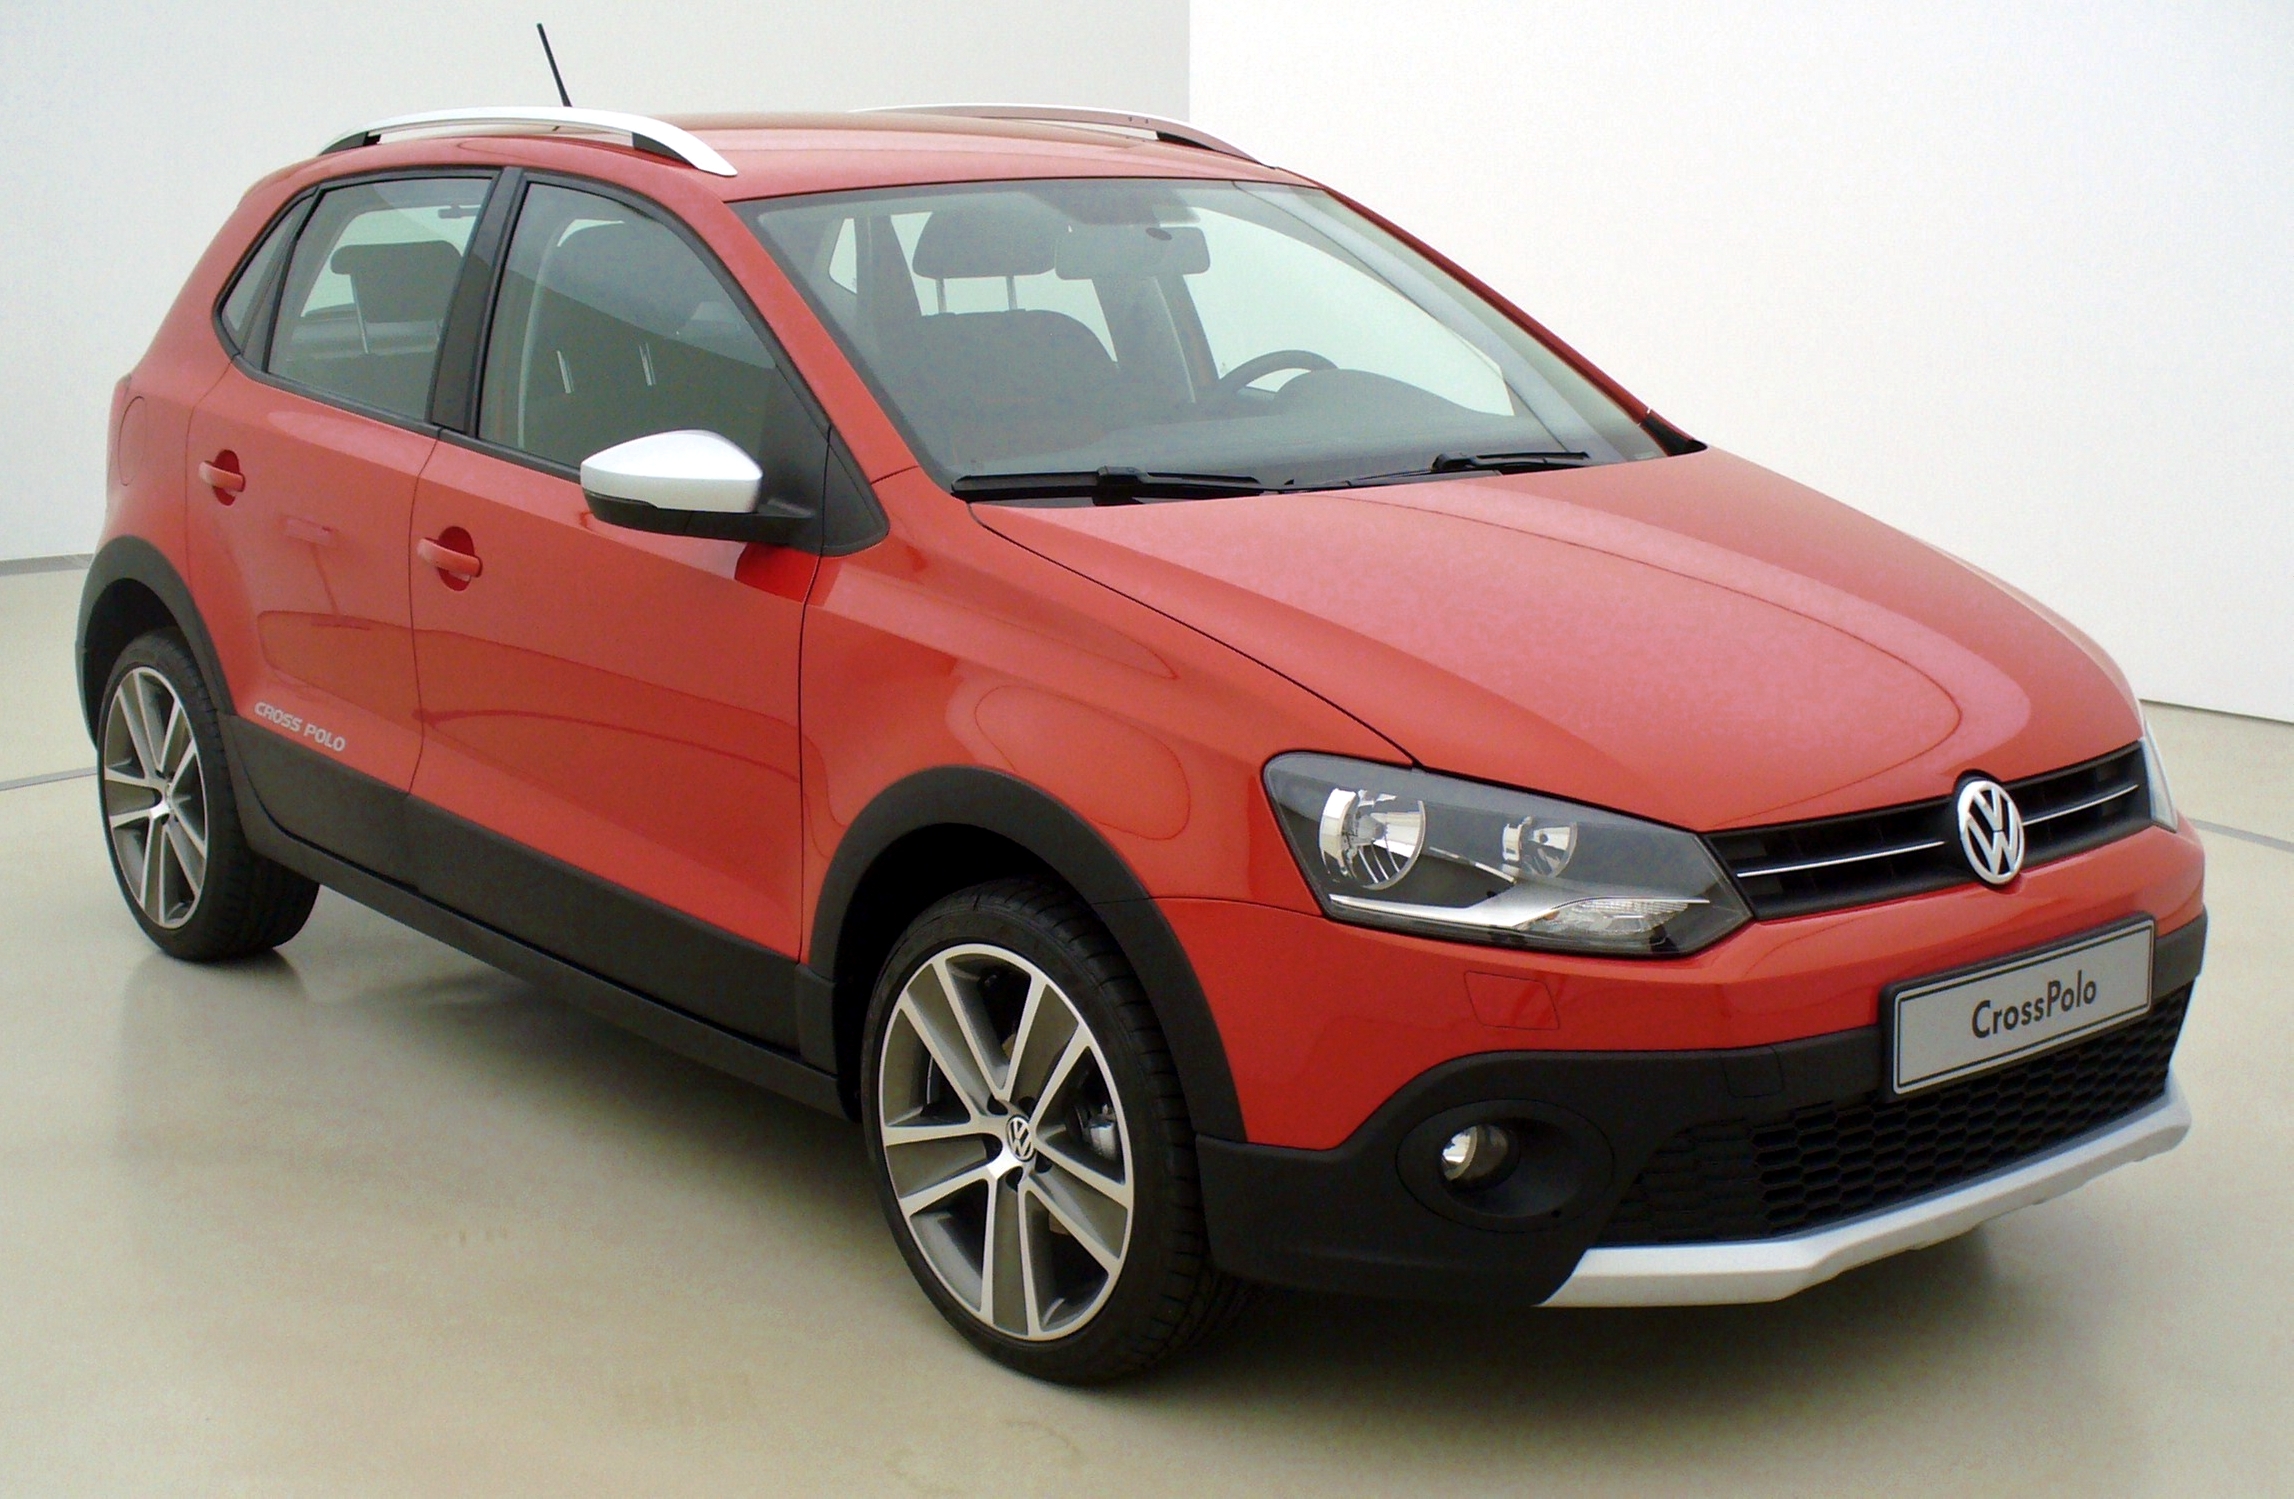 Volkswagen Launches Cross Polo At Rs. 7.75 lakh